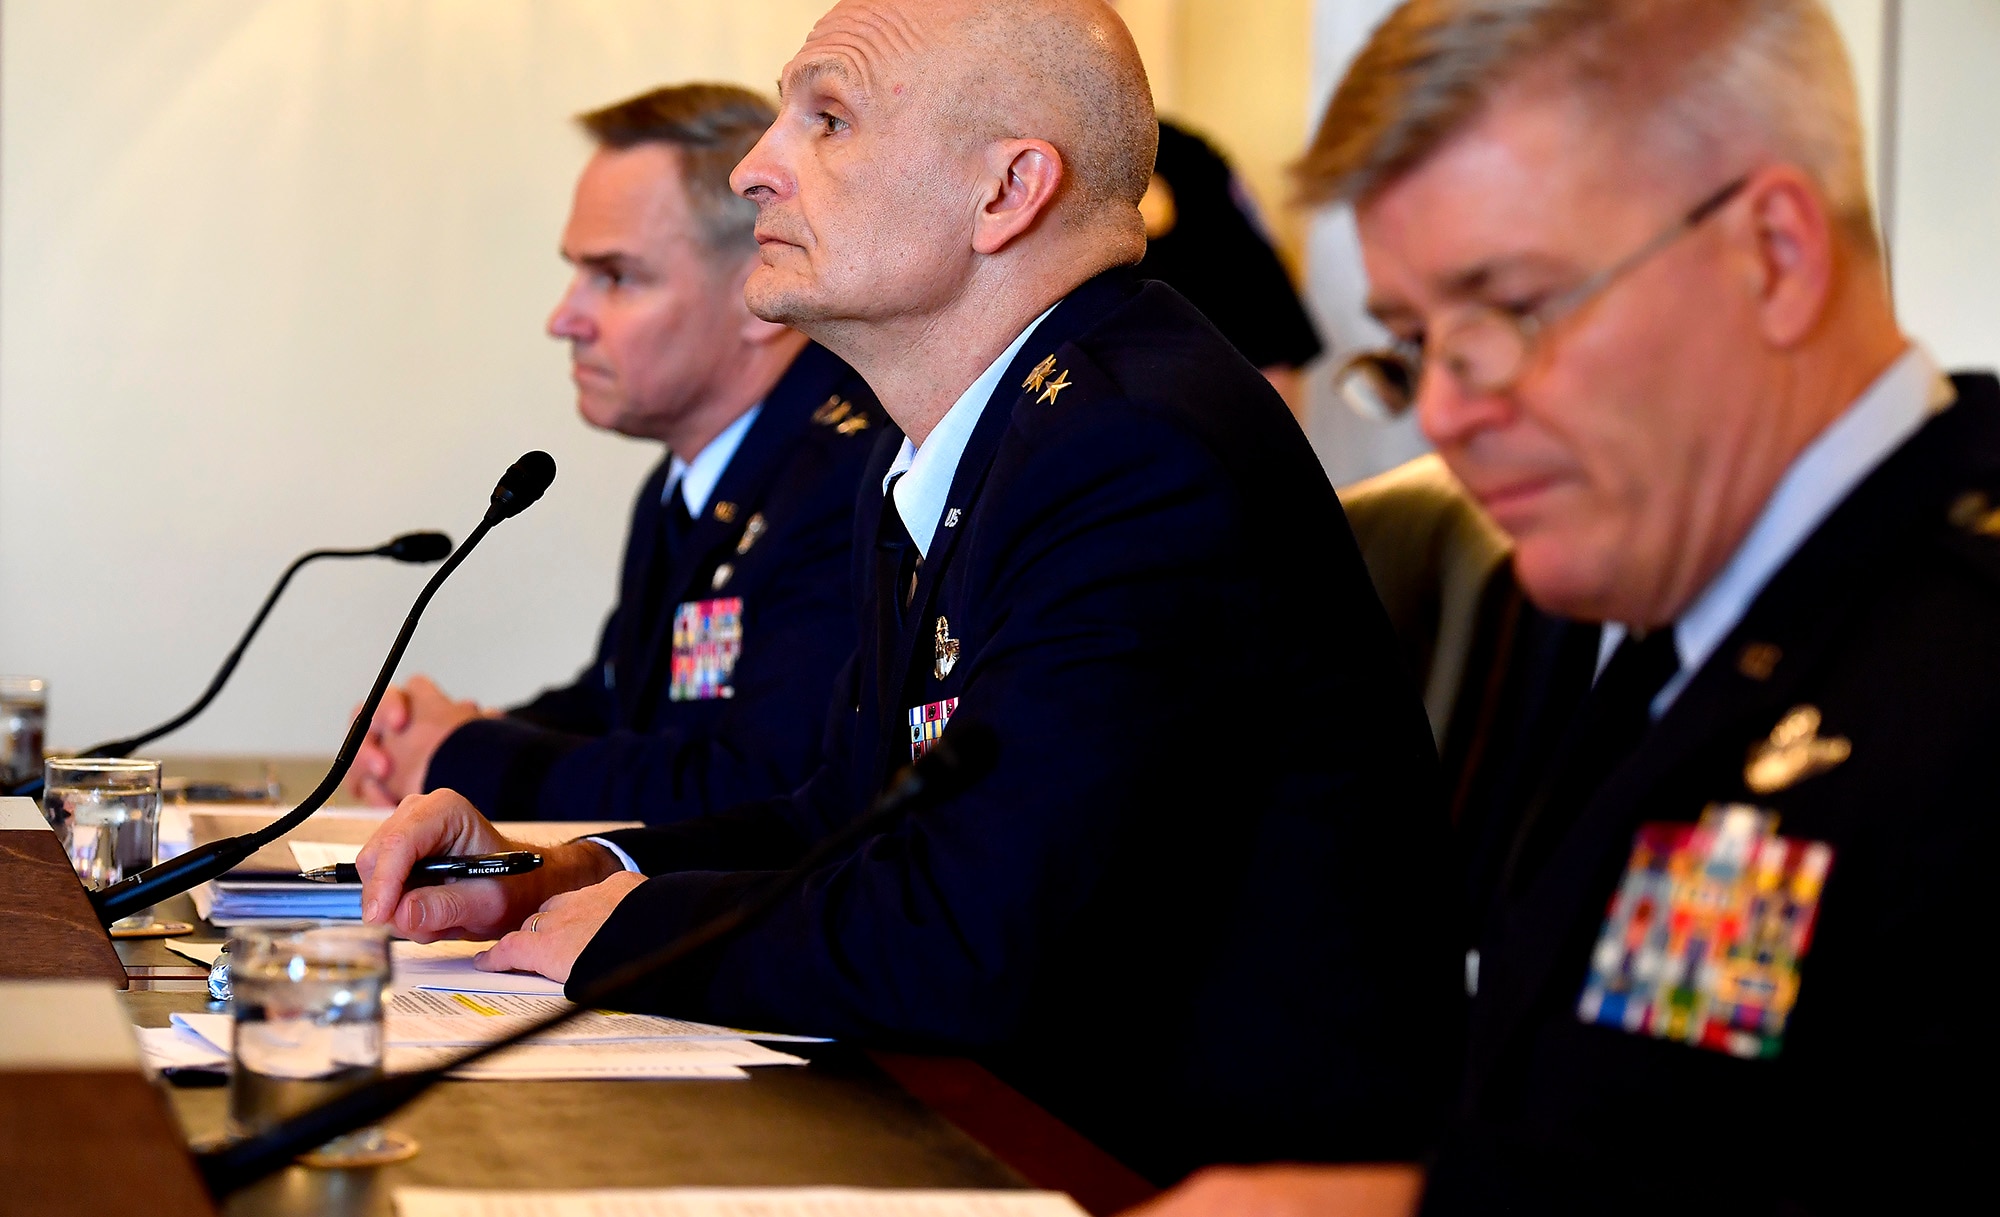 Lt. Gen. Arnold Bunch Jr., the military deputy for the Office of the Assistant Secretary of the Air Force, center, testifies before the Senate Armed Services Subcommittee on Tactical Air and Land Forces, and Air Force Modernization, March 29, 2017, in Washington, D.C.  Also testifying were, right, Lt. Gen. Jerry Harris Jr., the Air Force deputy chief of staff for Strategic Plans, Programs and Requirements, and Lt. Gen. Mark Nowland, the Air Force deputy chief of staff for Operations.  (U.S. Air Force photo/Scott M. Ash)